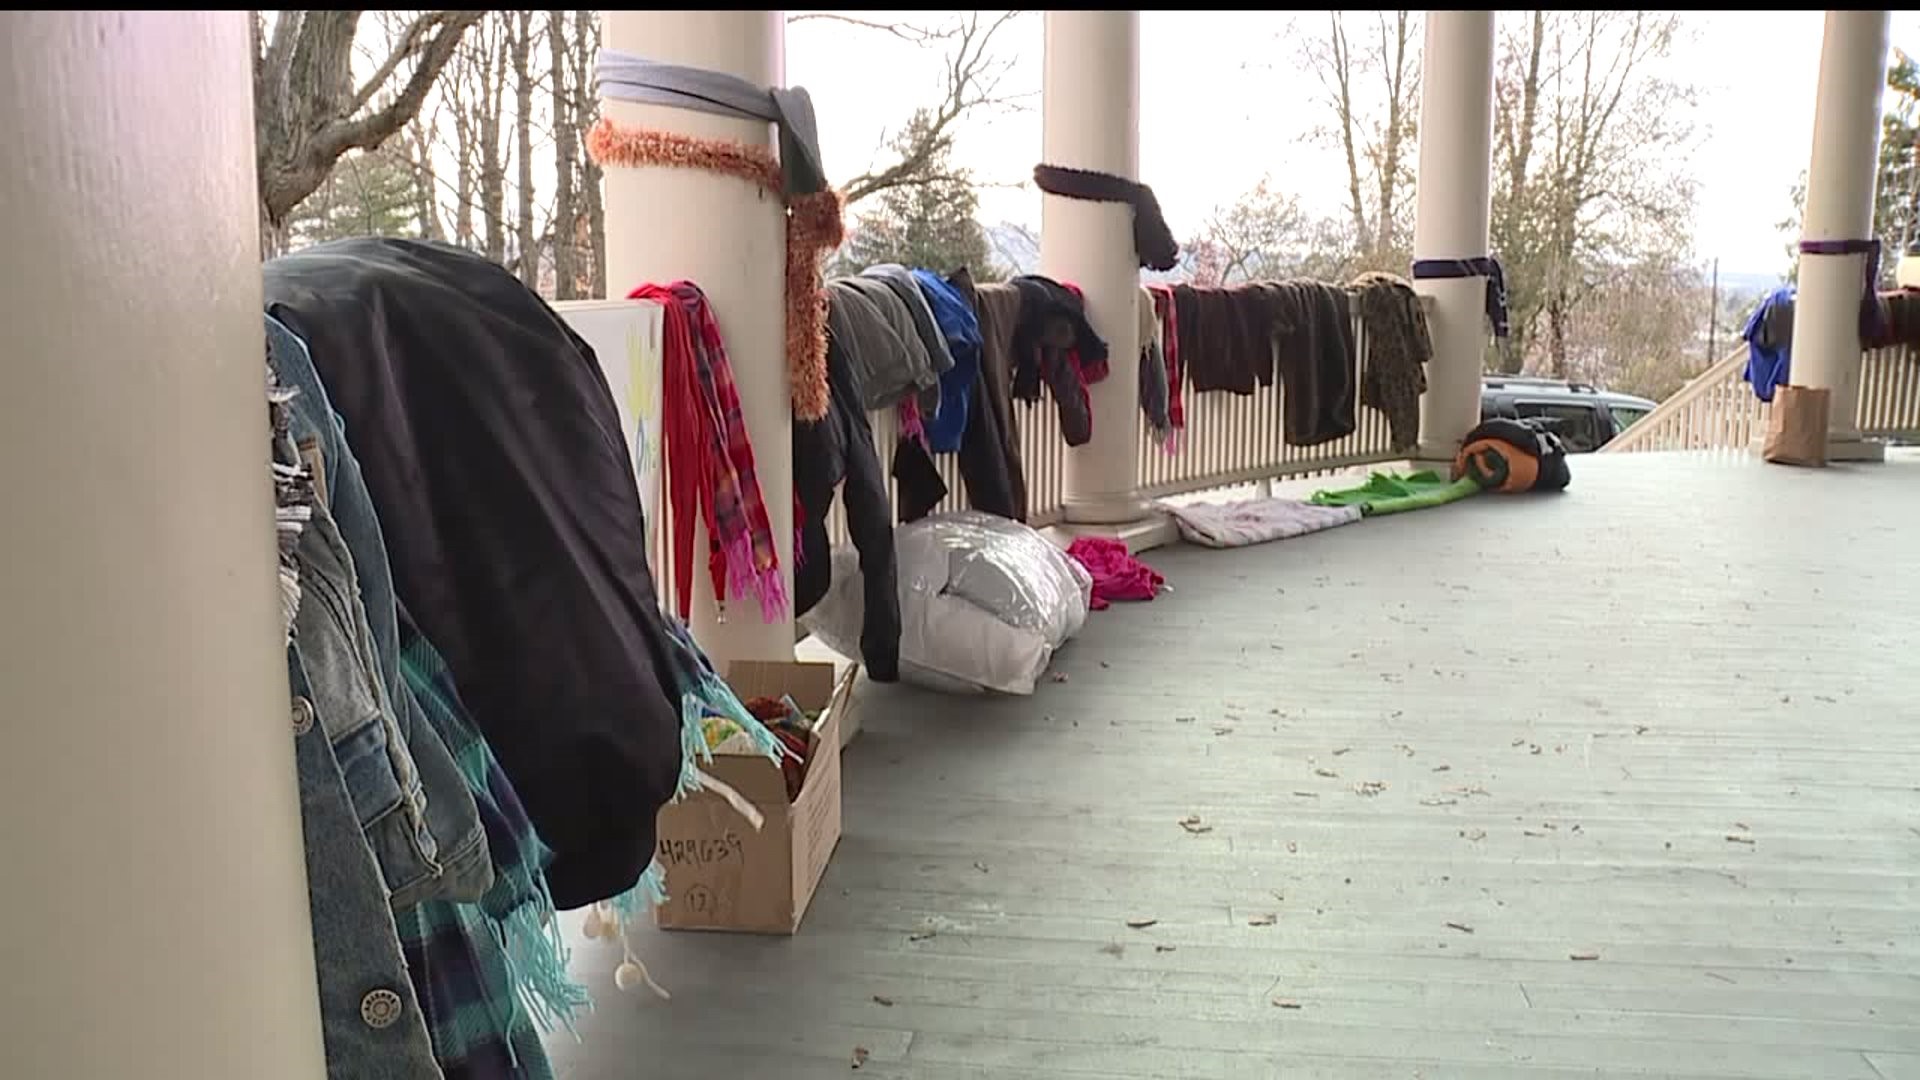 York woman collects winter clothes for those in need